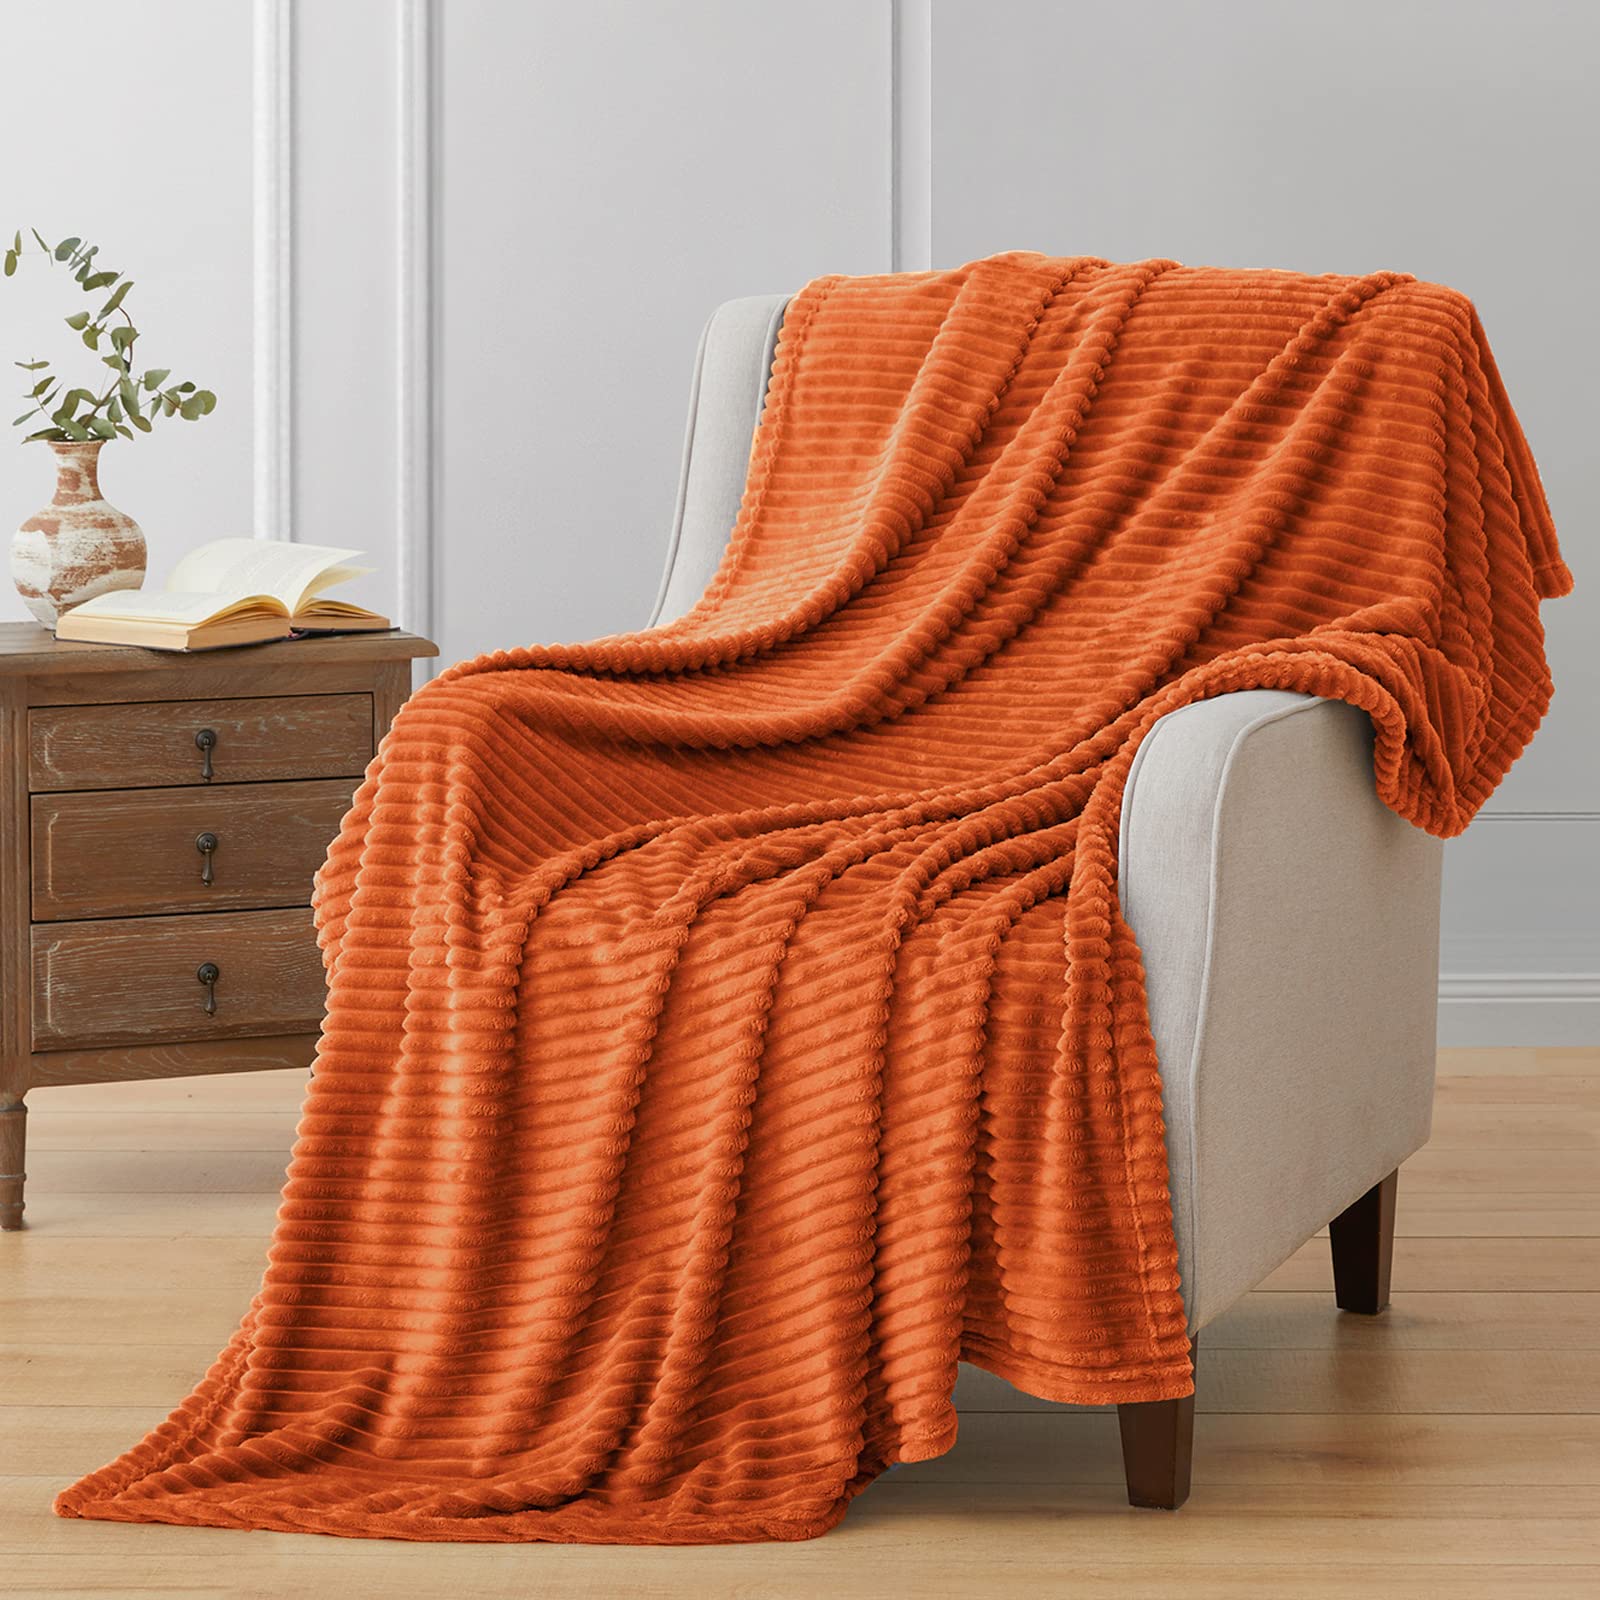 Vessia Flannel Fleece Orange Throw Blanket for Couch, Lightweight Striped Blanket Throw for Adults and Kids, Warm Cozy Soft Bed 